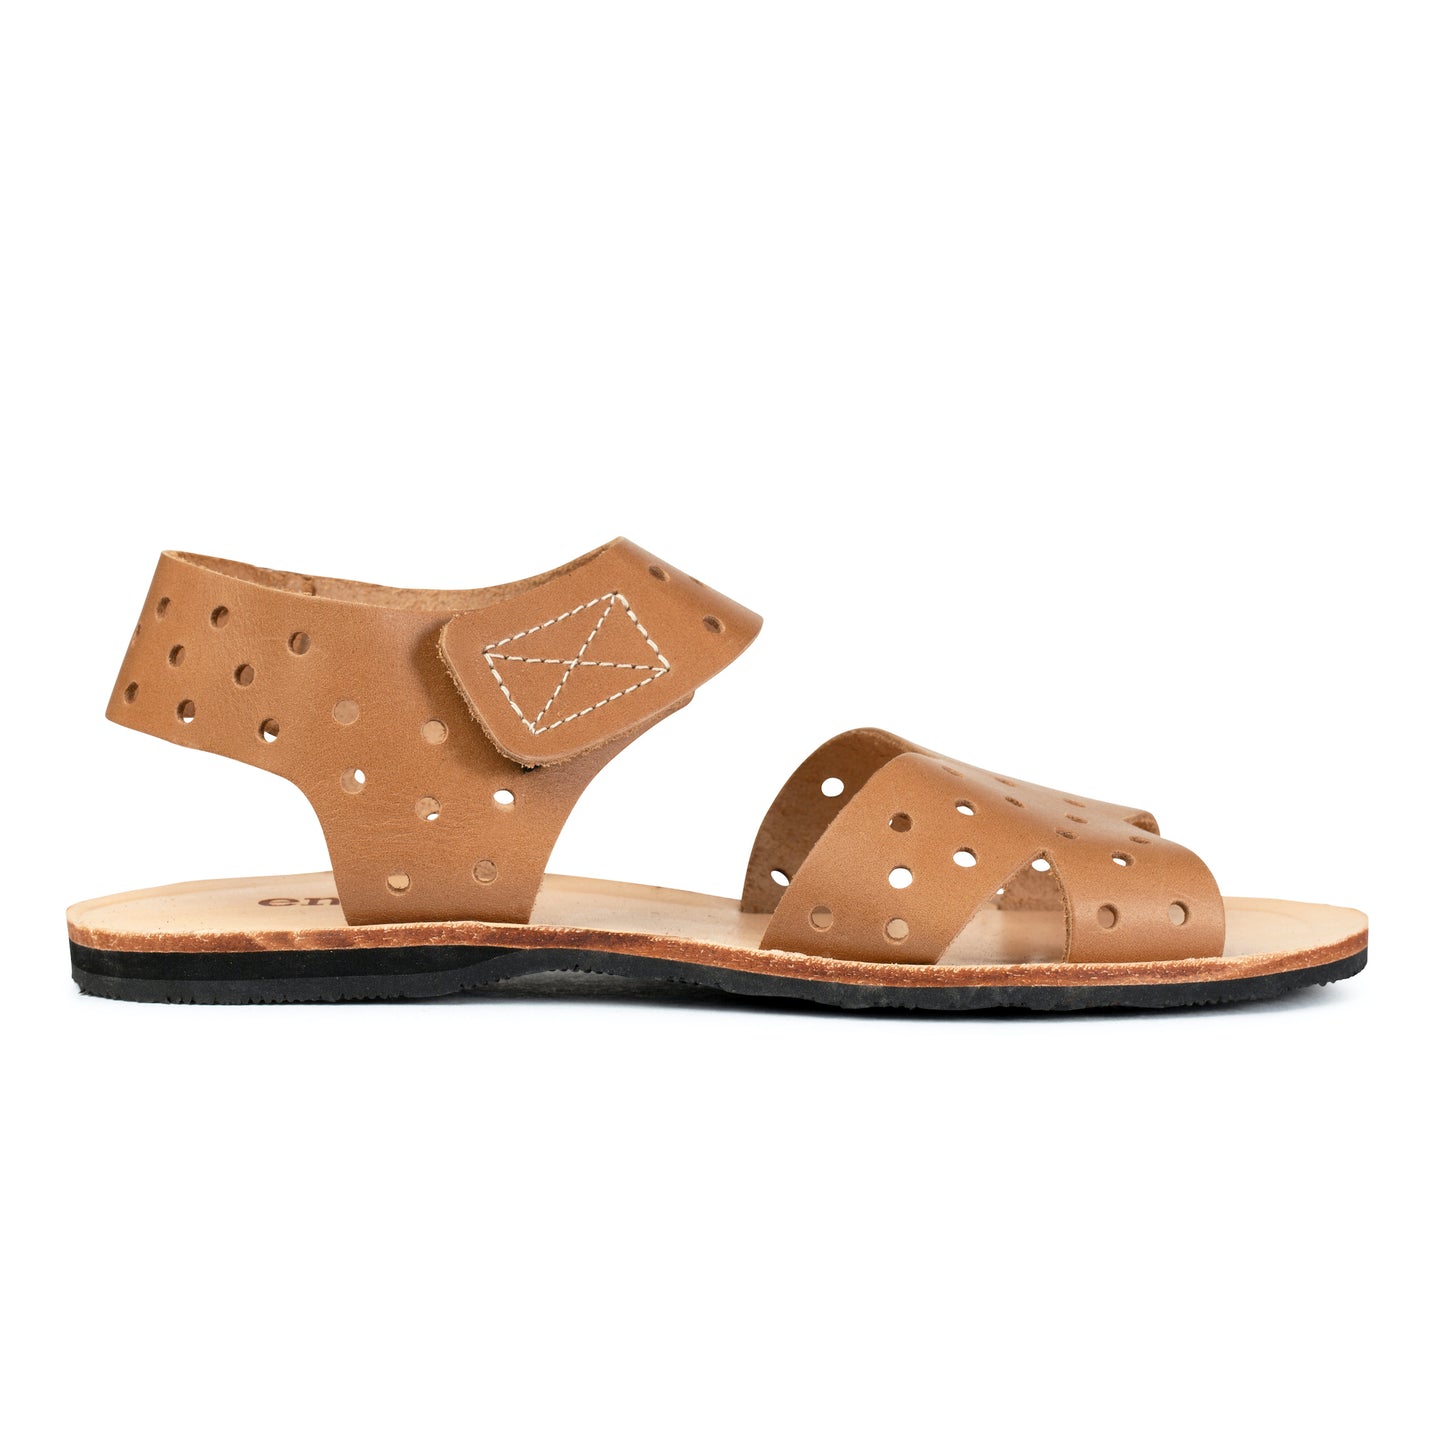 Frances Leather Sandal - Light Brown Perforated